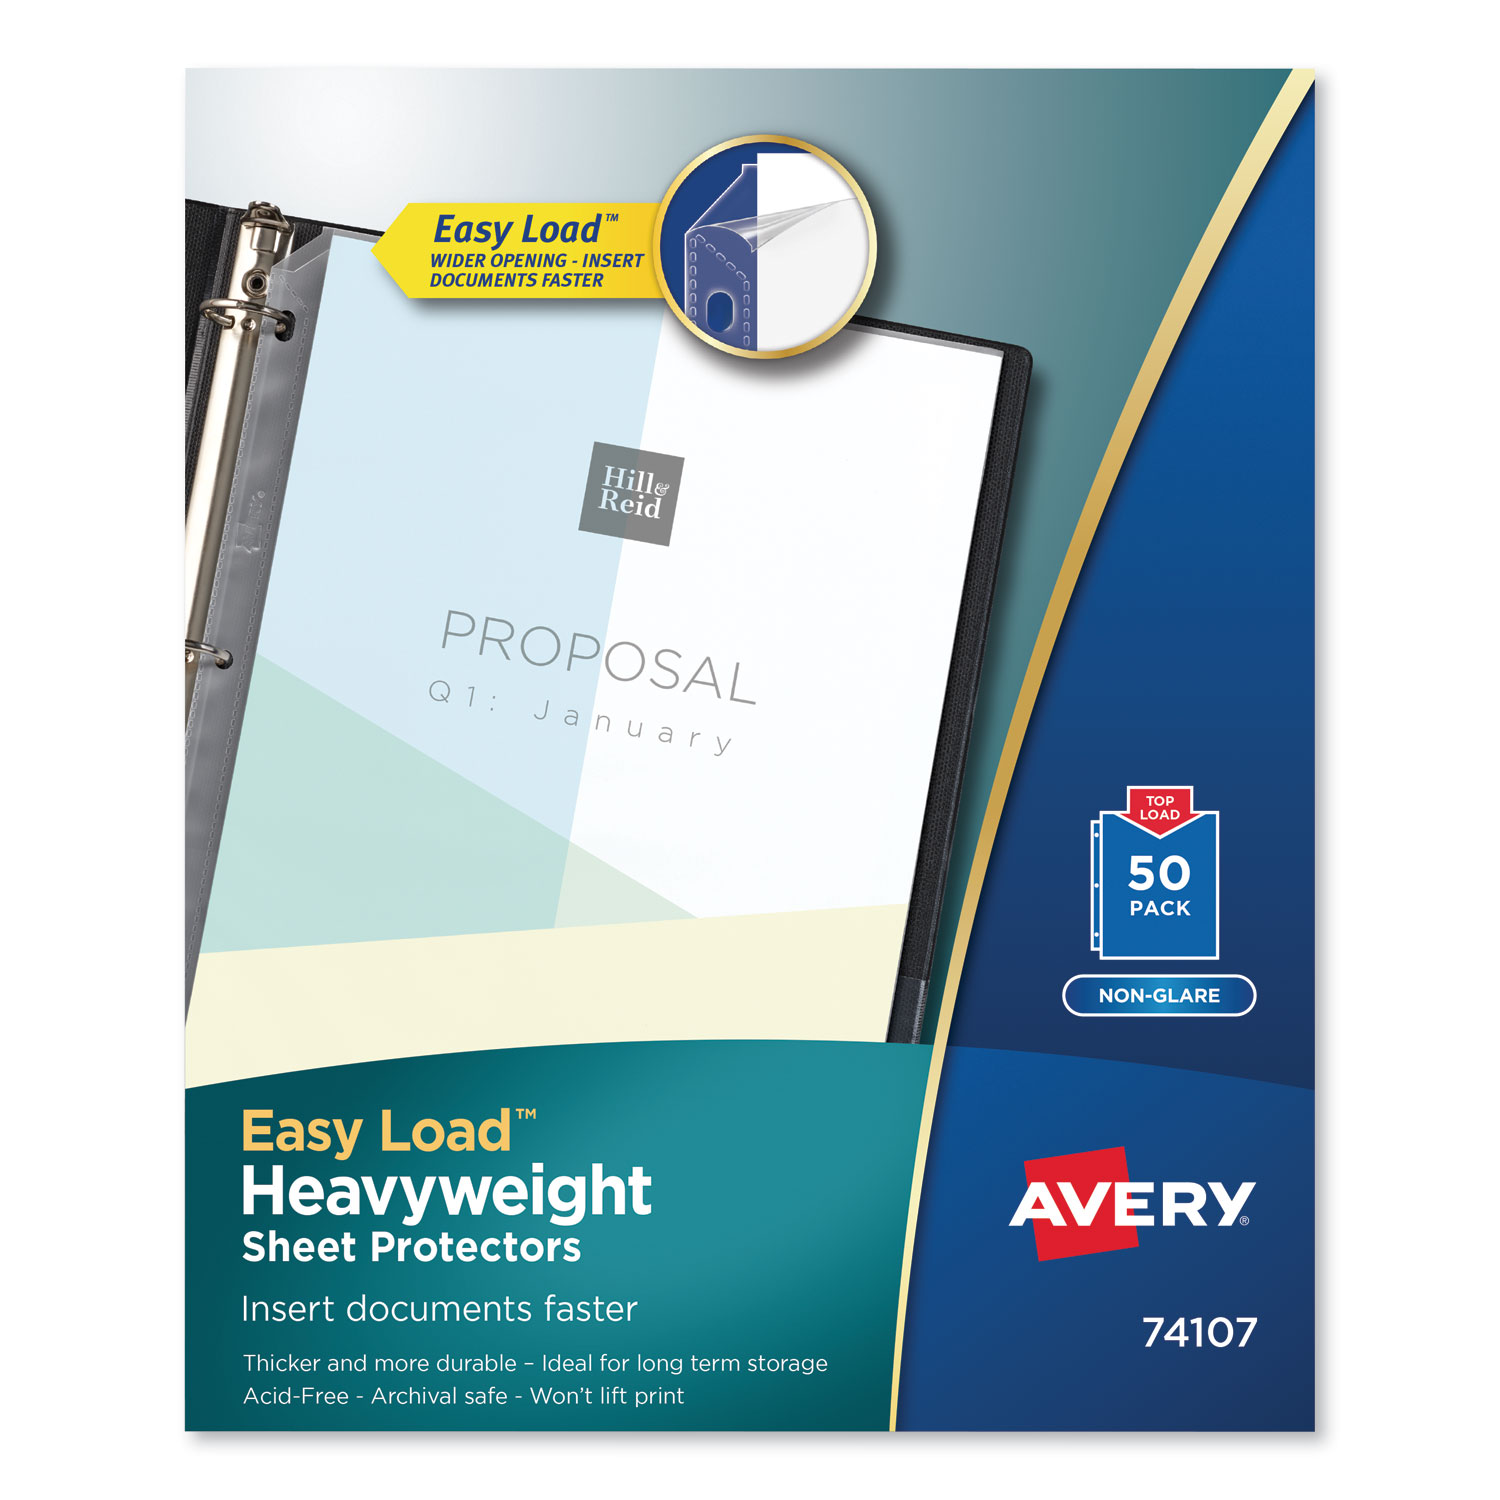  Avery 74107 Top-Load Poly Sheet Protectors, Heavy Gauge, Letter, Nonglare, 50/Box (AVE74107) 